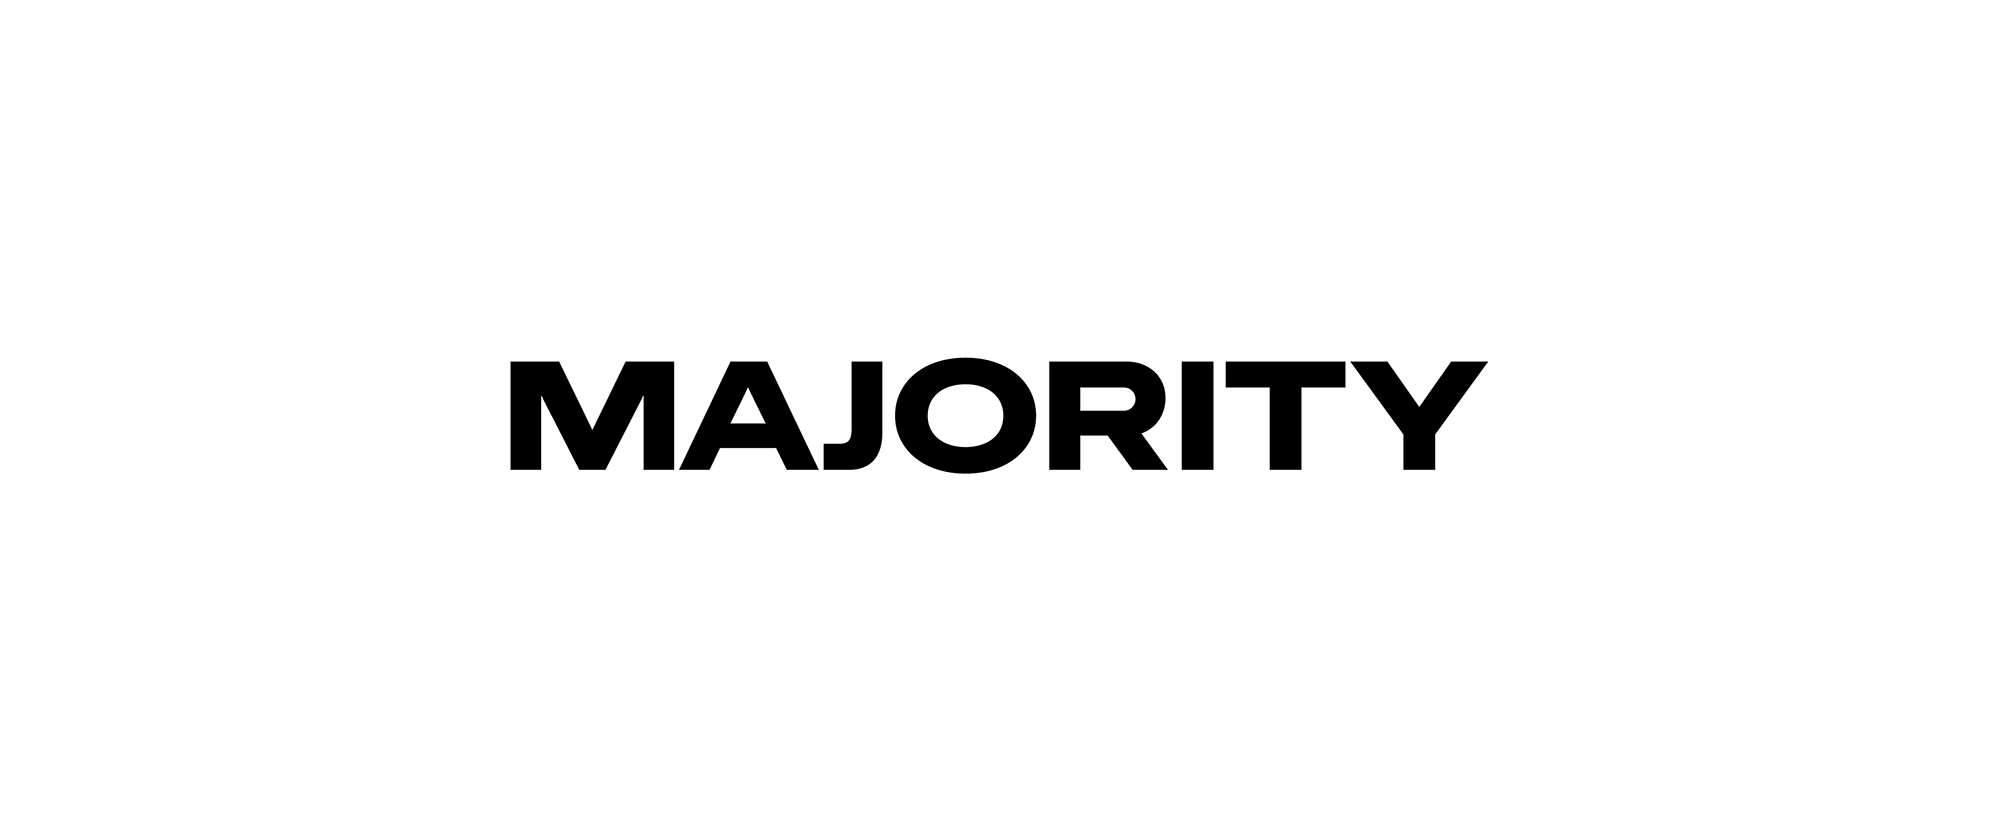 New Logo and Identity for Majority by Bold